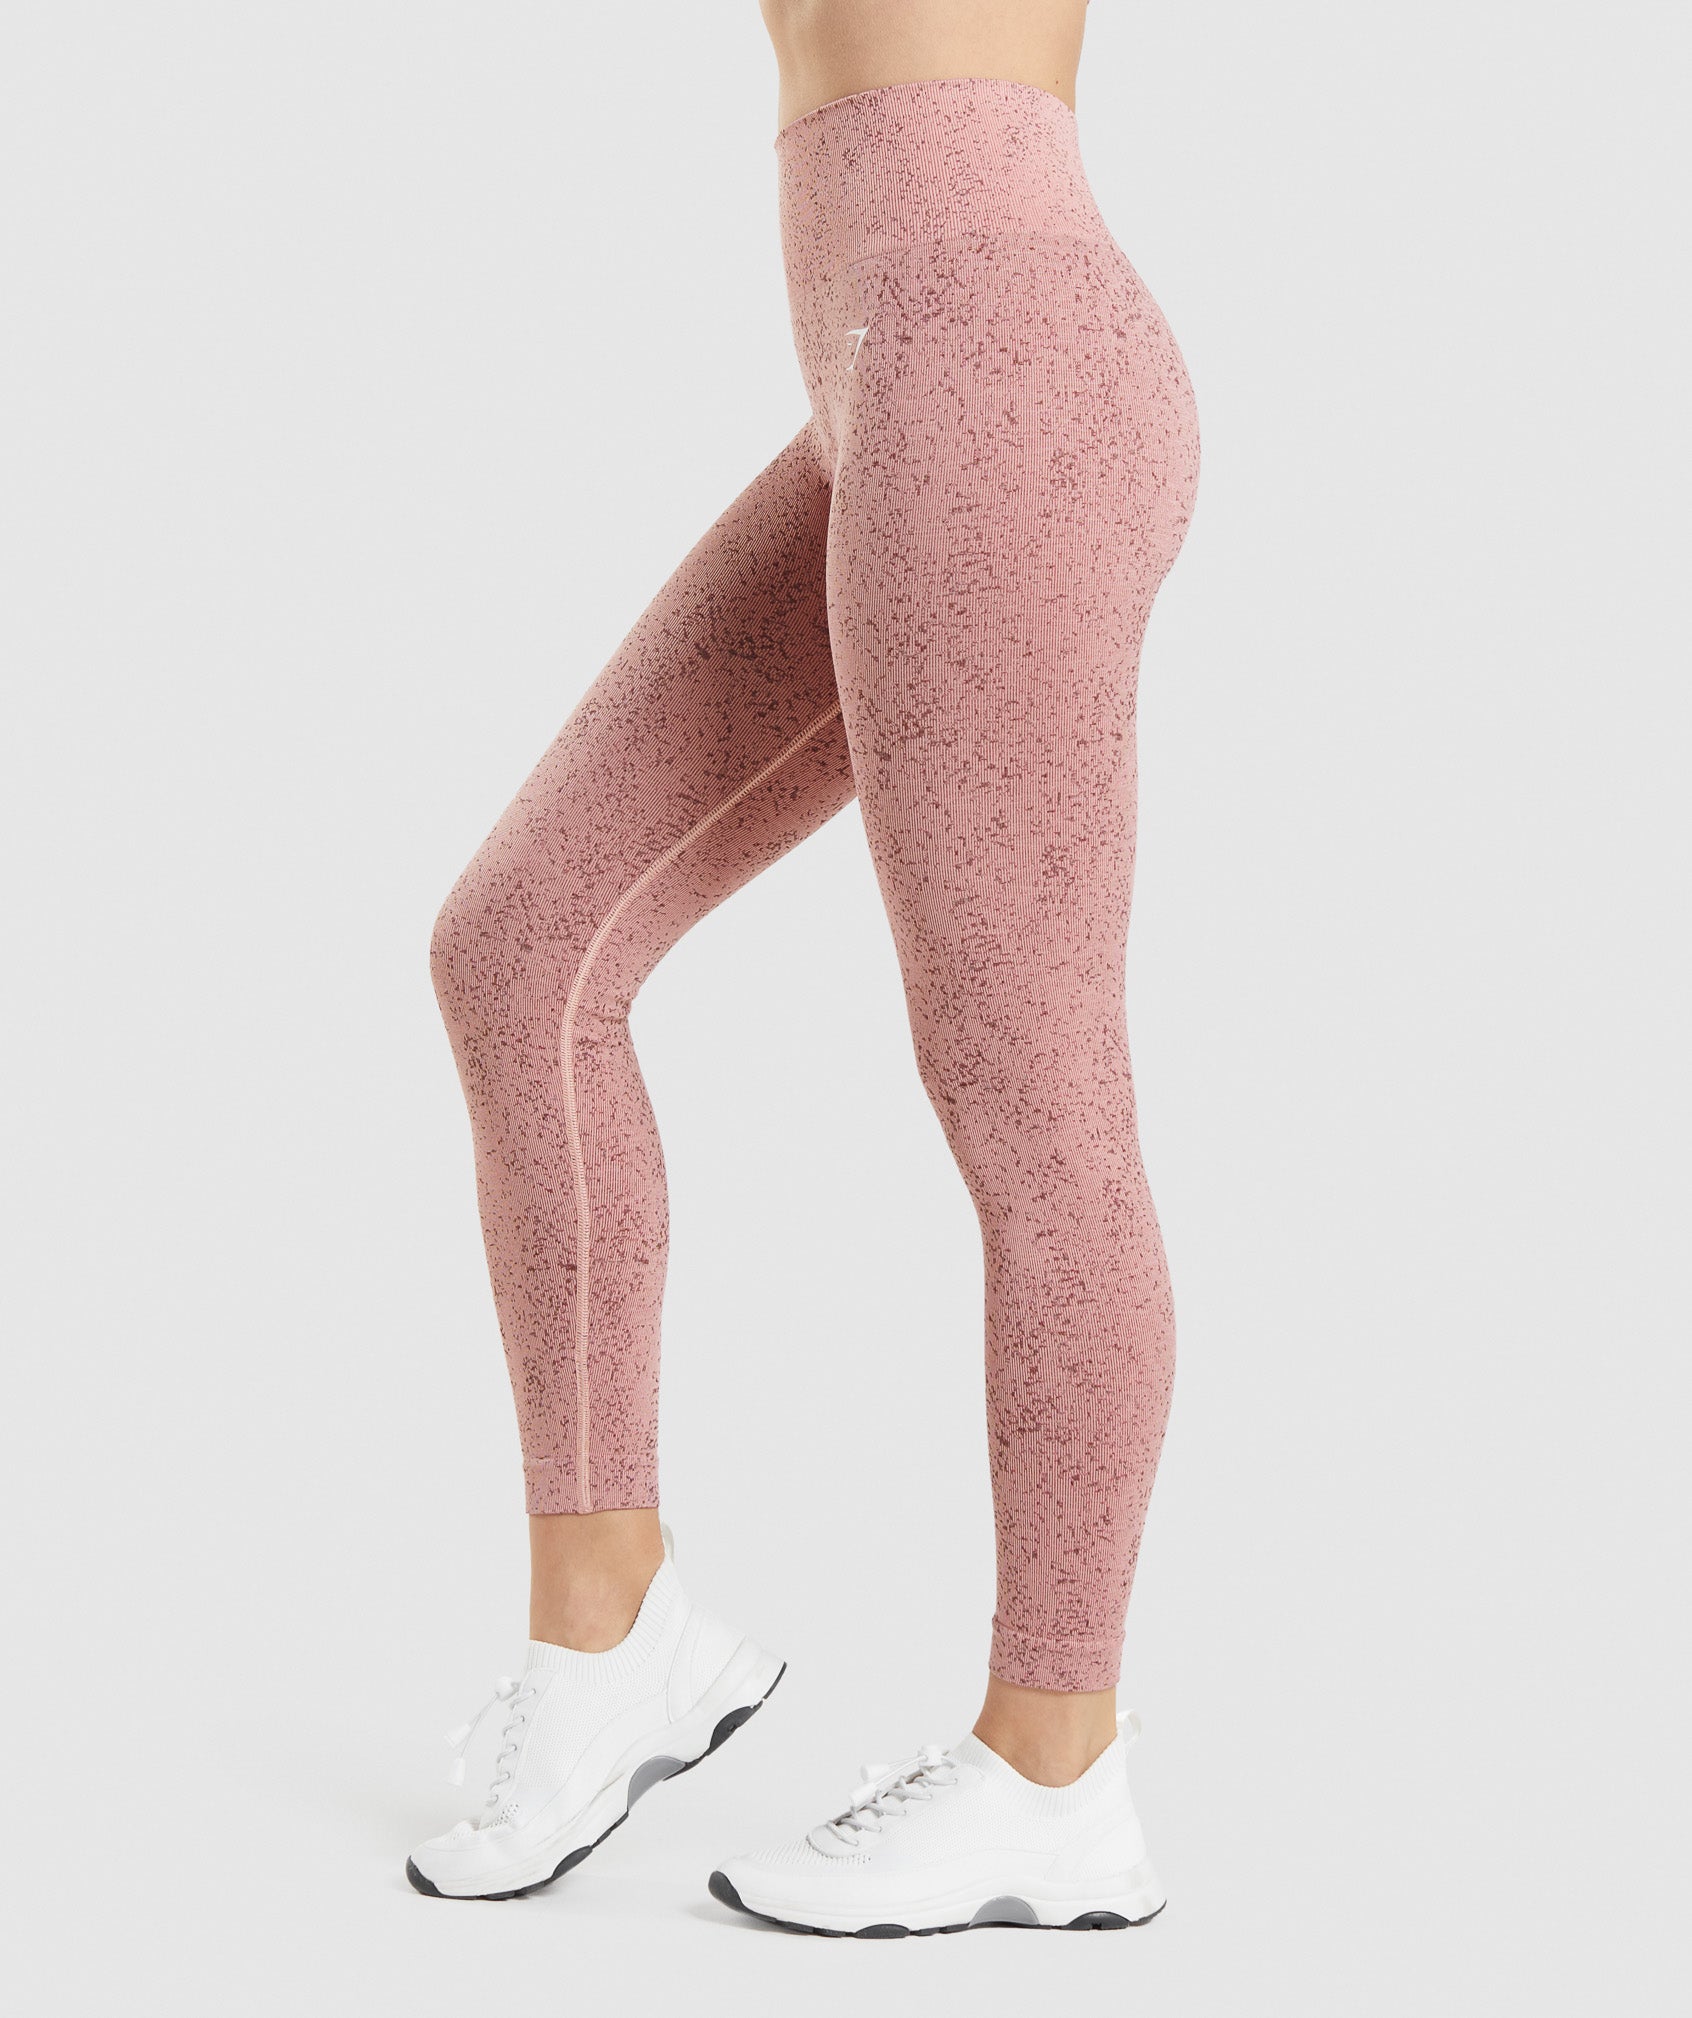 Adapt Fleck Seamless Leggings in Mineral | Paige Pink - view 3